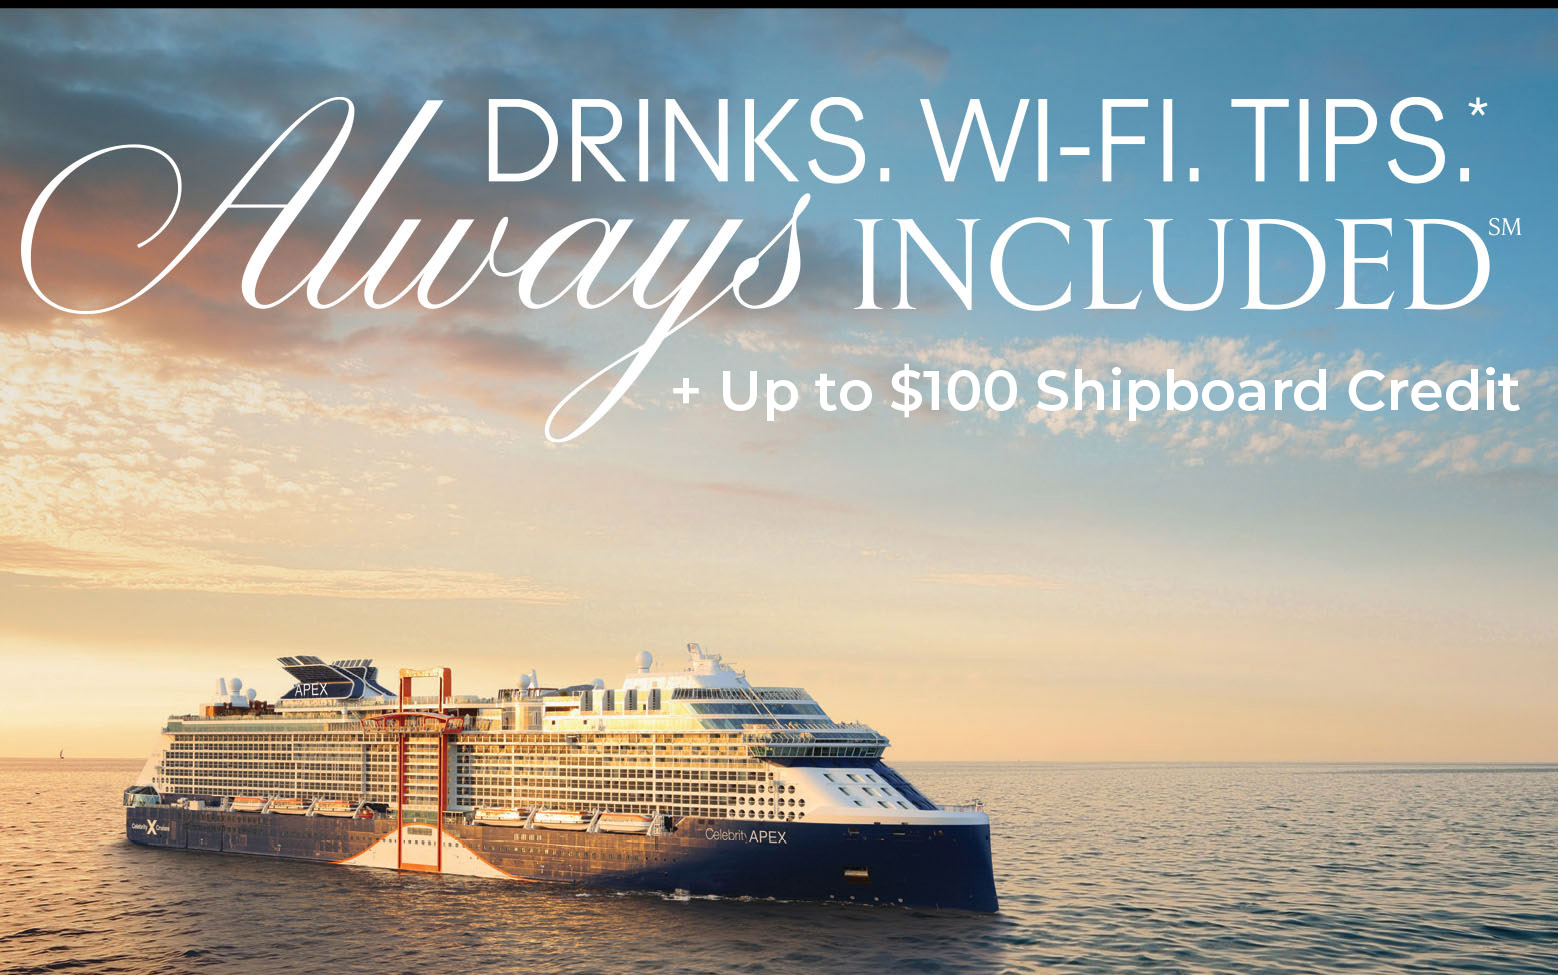 Free Drinks. Wi-FI. Tips and SBC with Celebrity Cruise